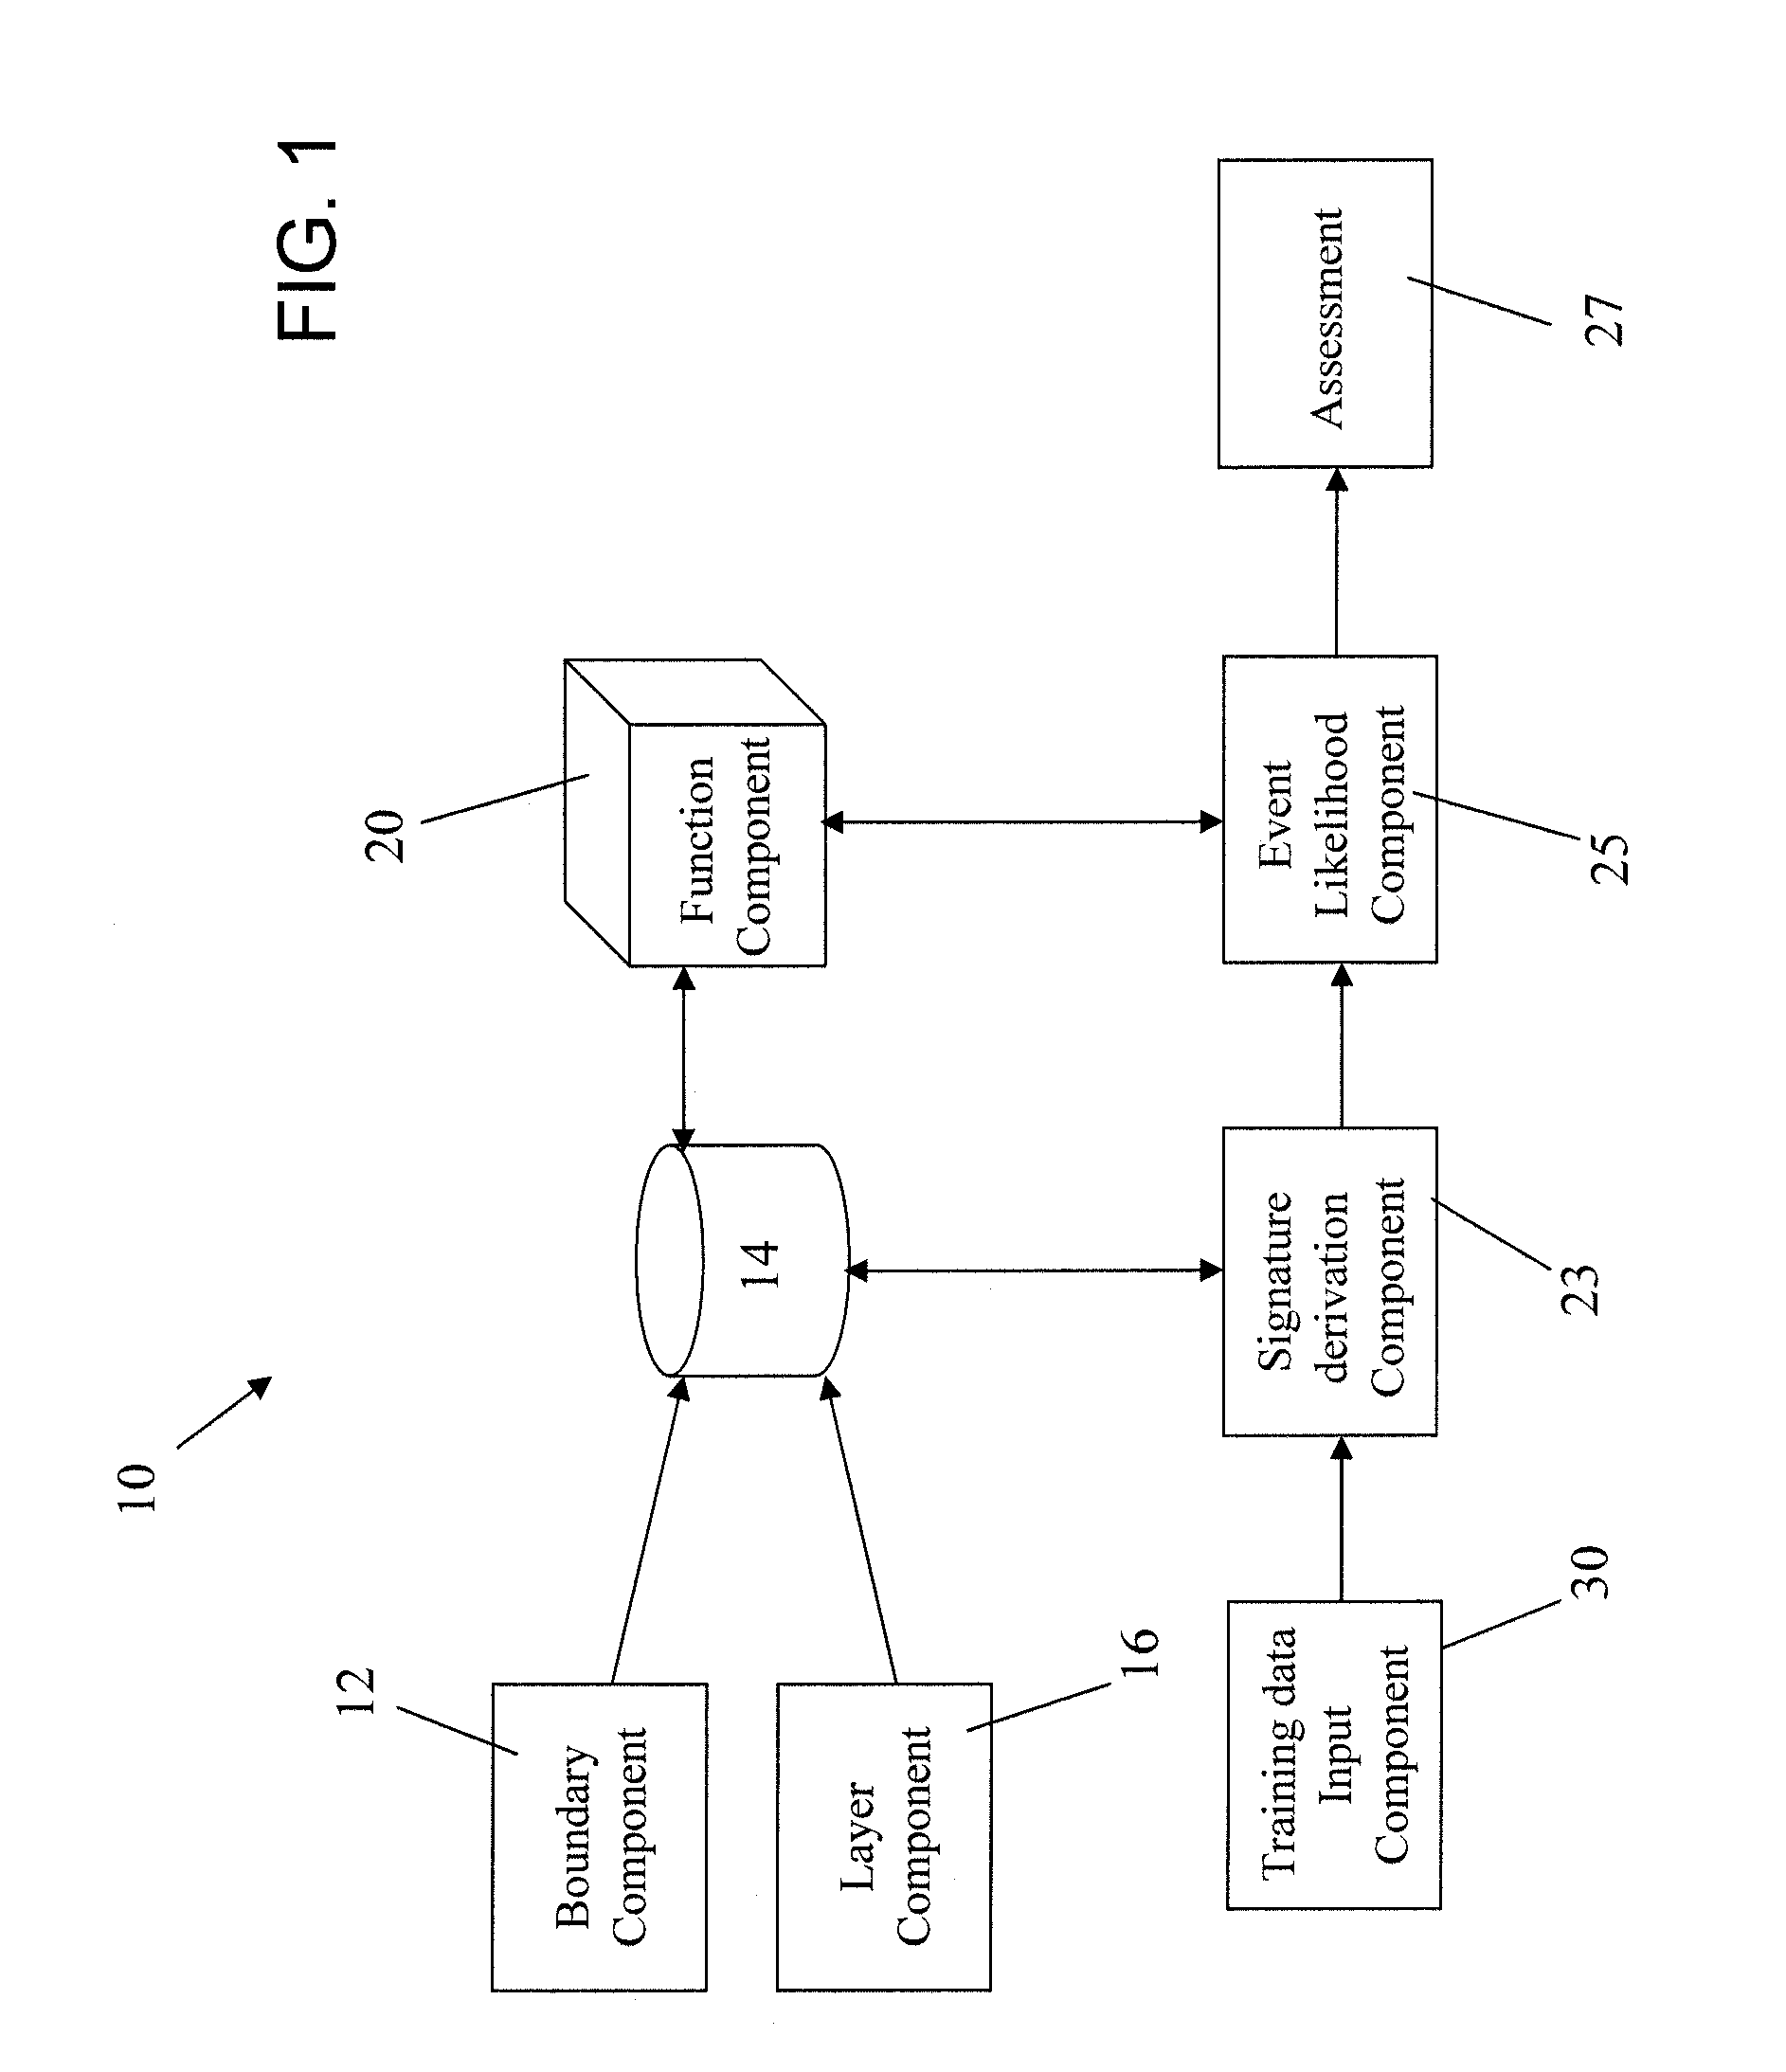 Temporal-Influenced Geospatial Modeling System and Method